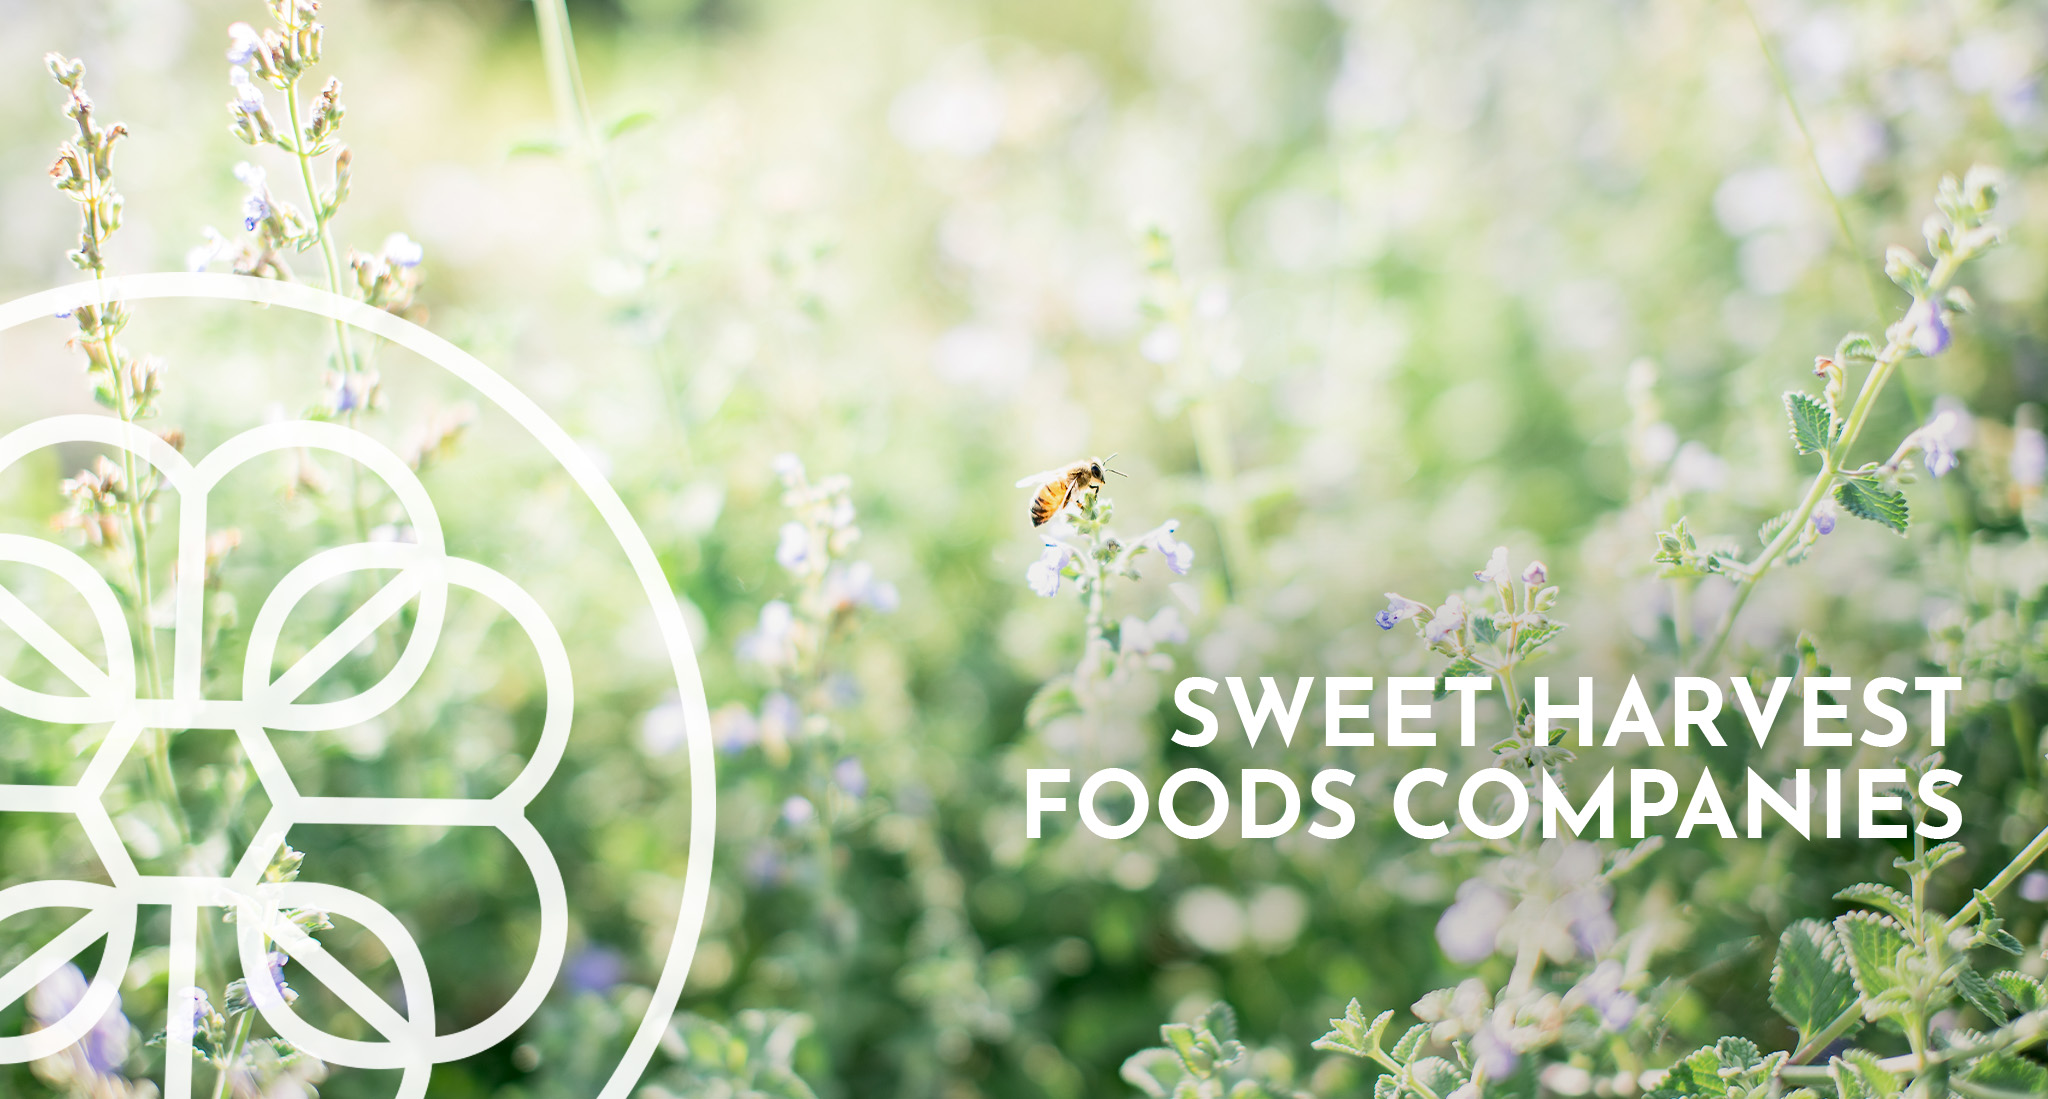 A bee hovers over a floral field with the Sweet Harvest Foods Companies logo overlay.